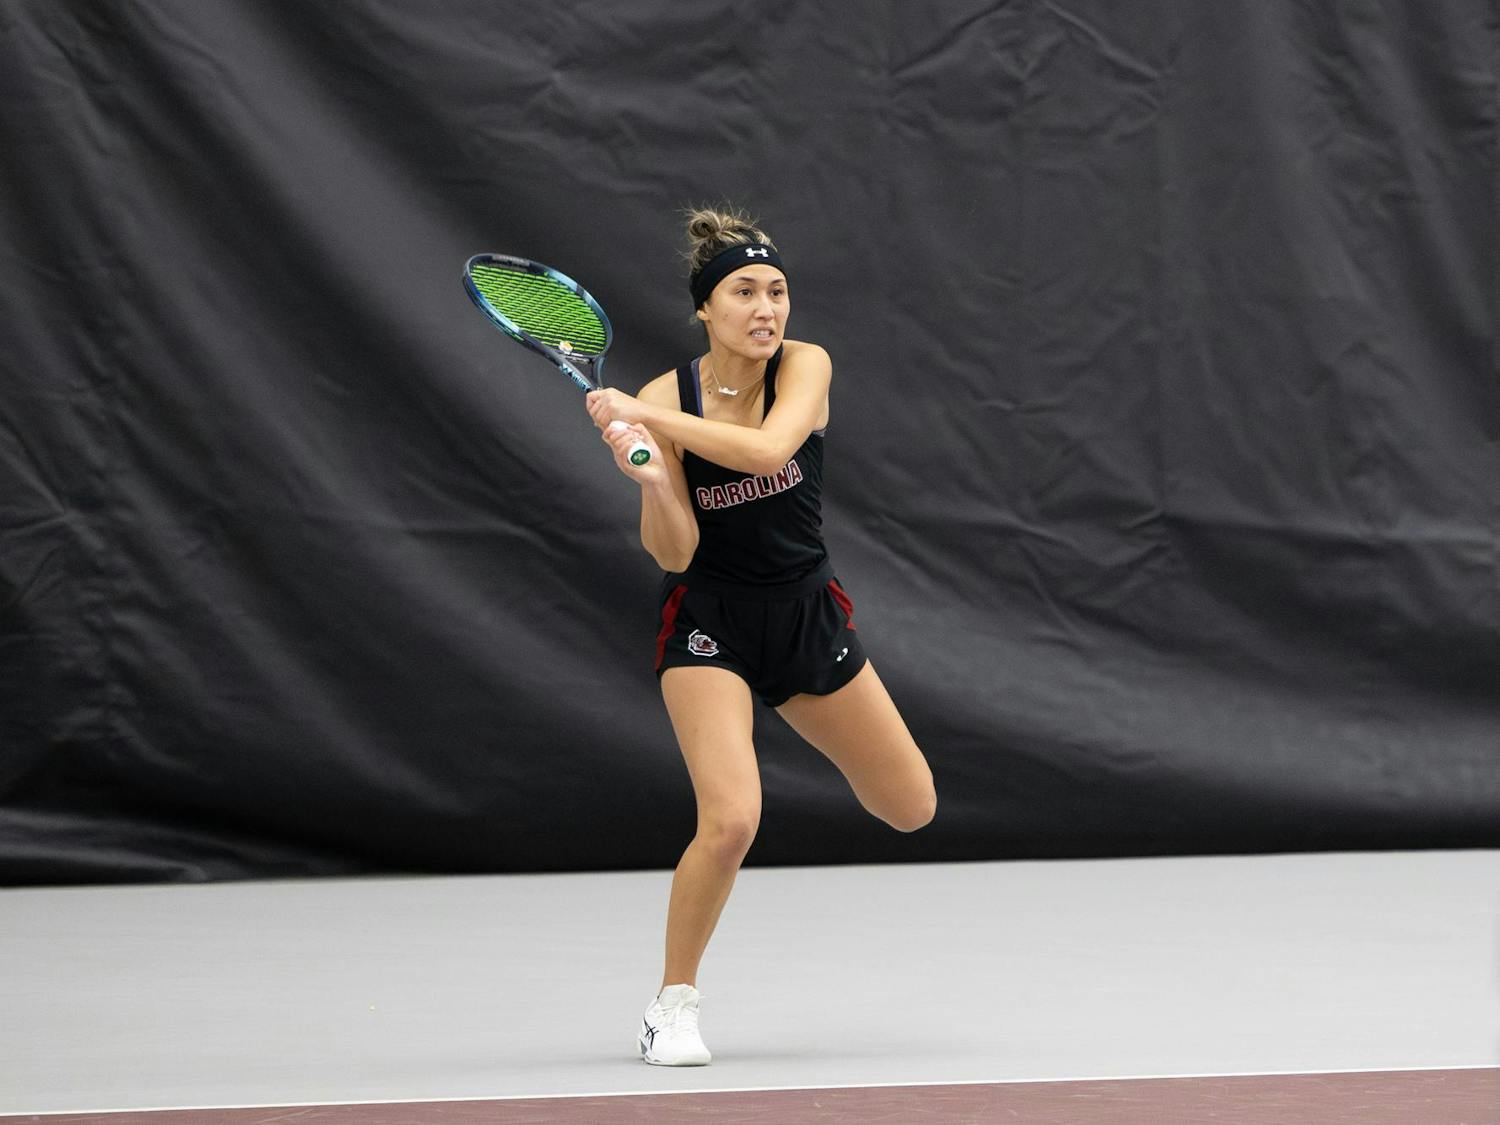 Gamecock junior Misa Malkin takes her stance to forehand the ball against the Chanticleers. Malkin and her teammate junior Sarah Hamner won 6-3 in their doubles set against Coastal Carolina on Jan. 21, 2024, at the Carolina Indoor Tennis Center.&nbsp;